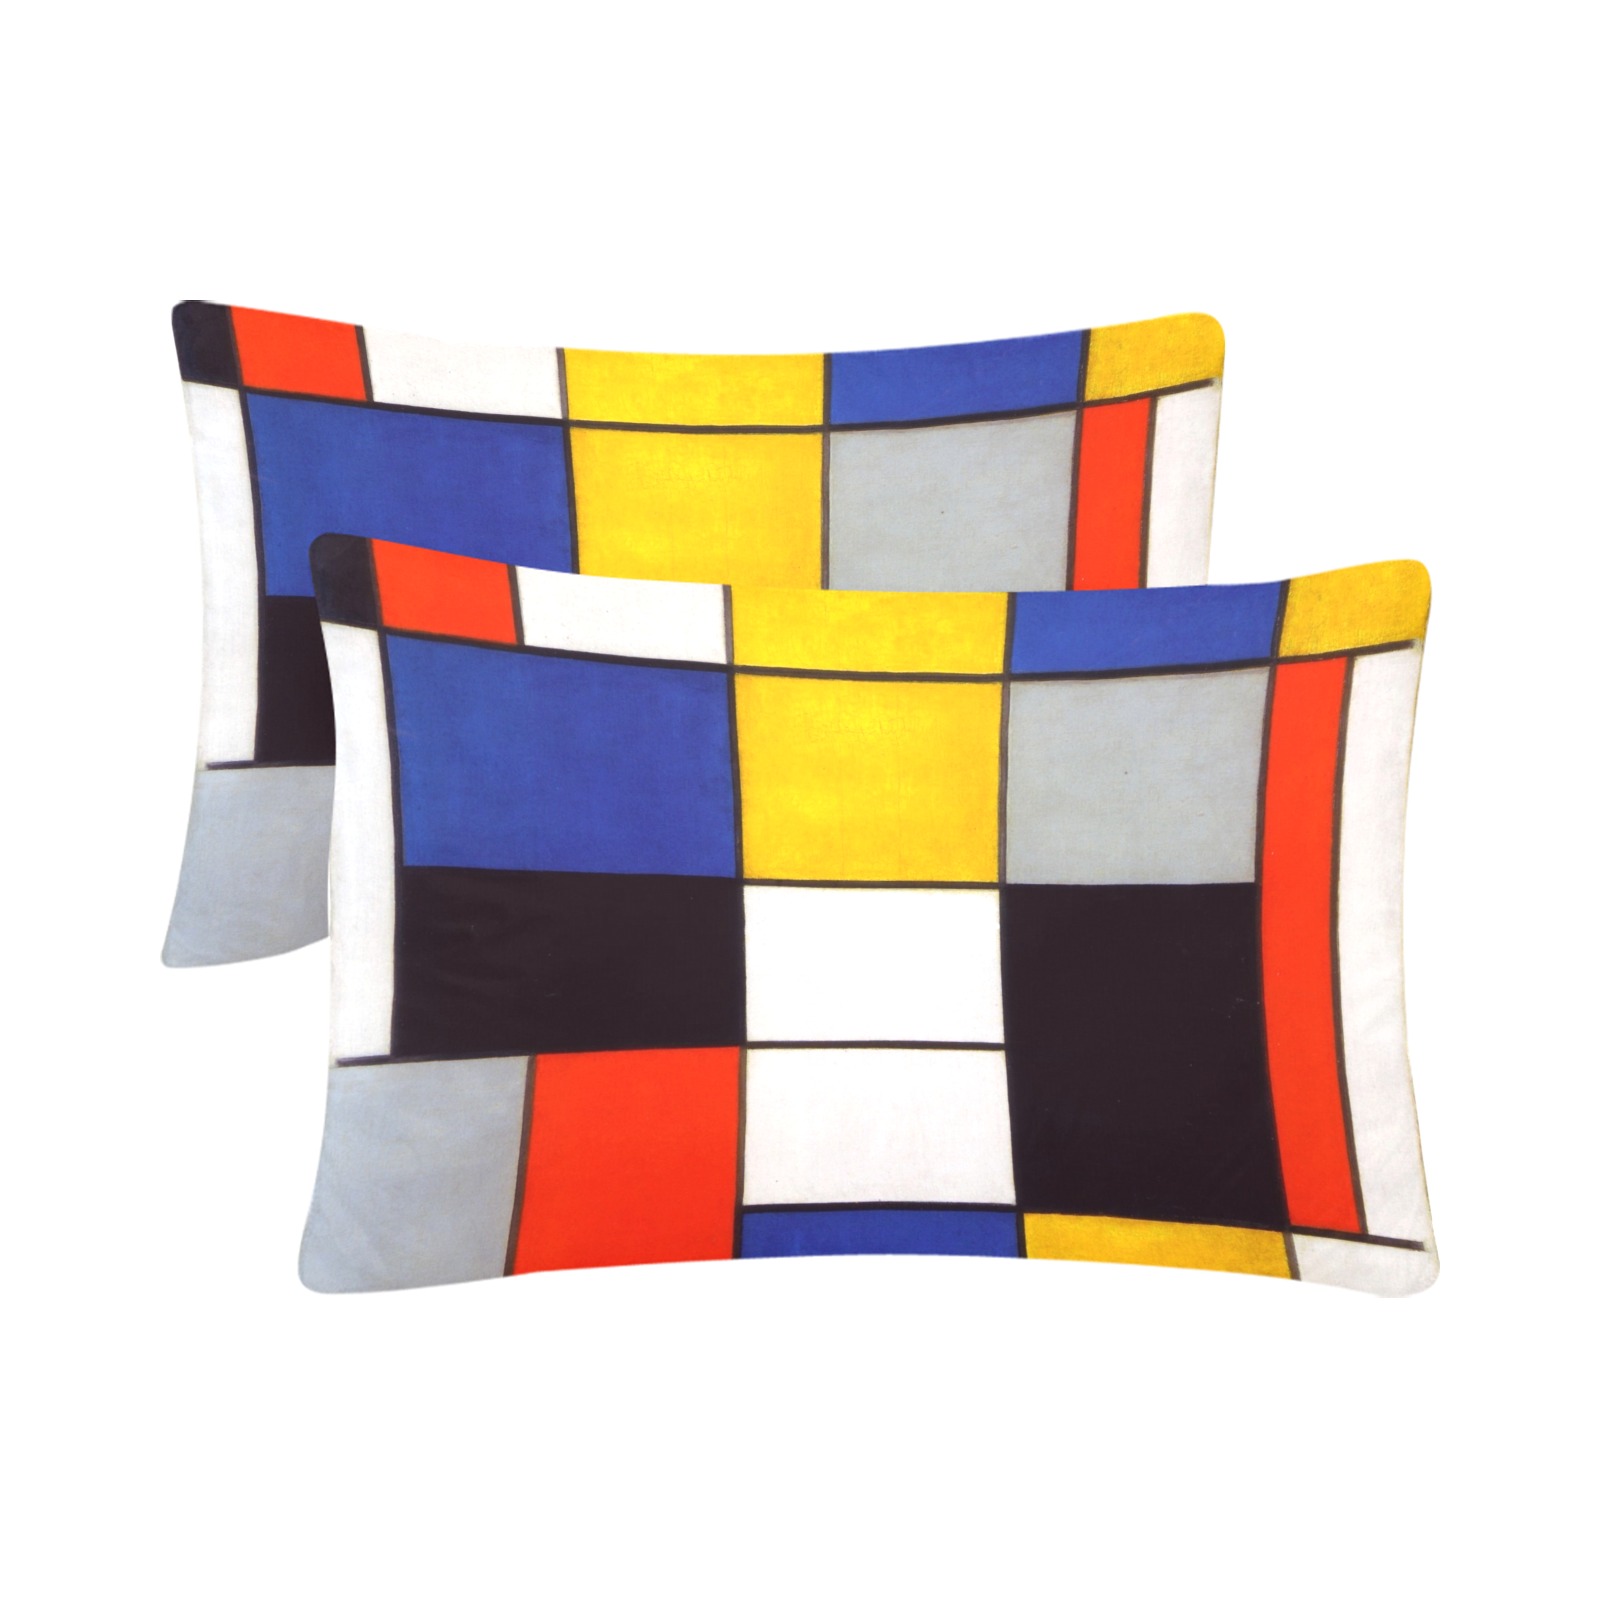 Composition A by Piet Mondrian Custom Pillow Case 20"x 30" (One Side) (Set of 2)